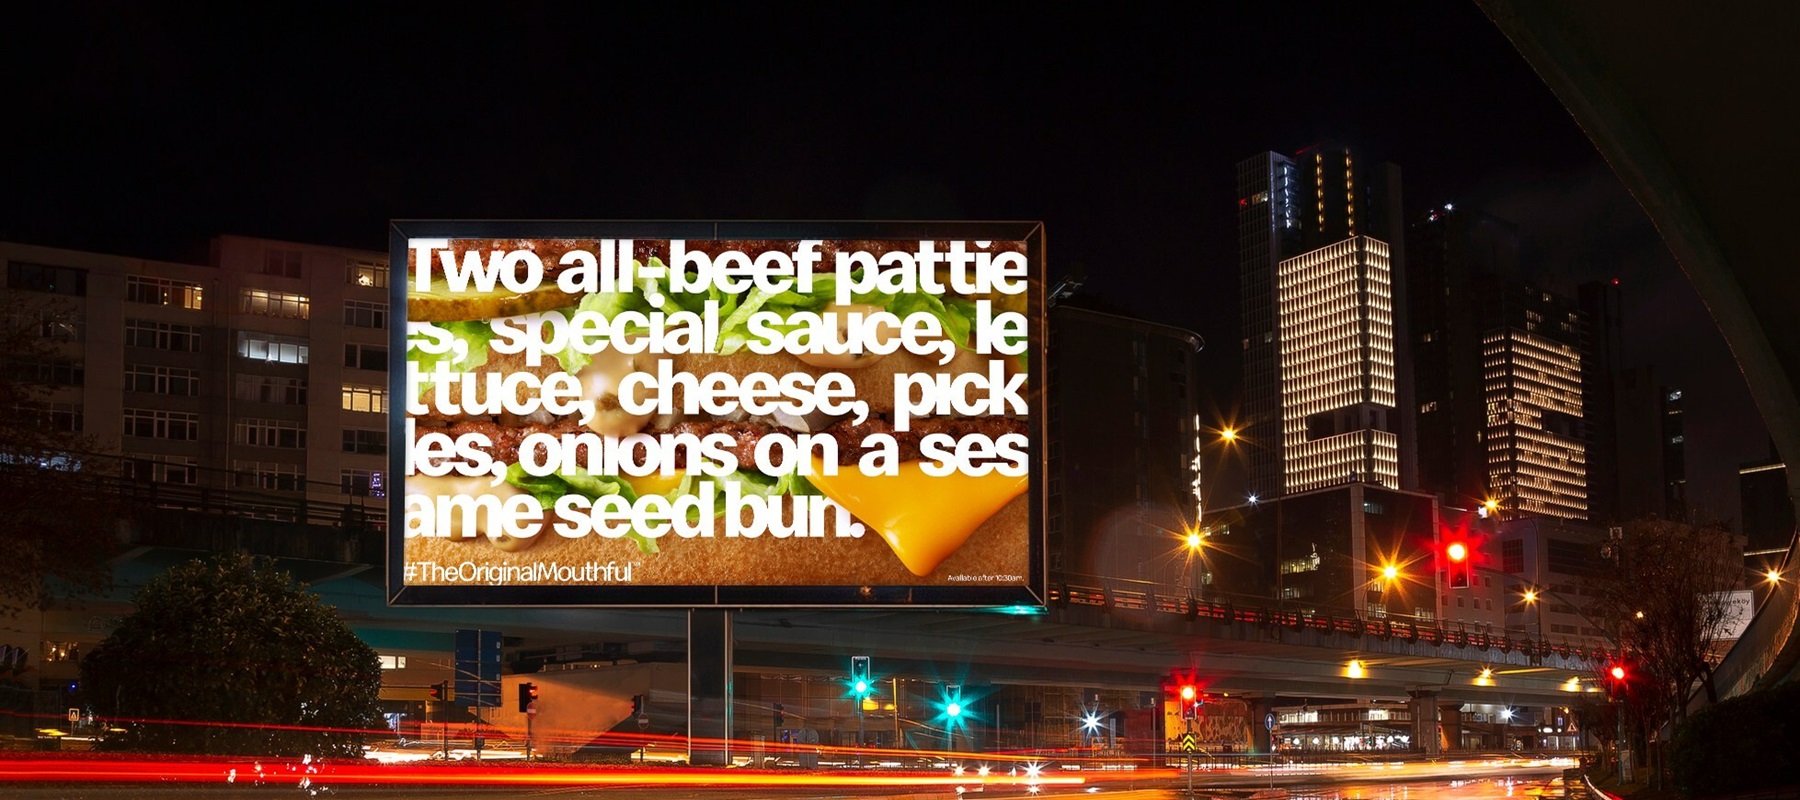 McDonald's Australia and DDB revive the classic Big Mac chant in new integrated campaign